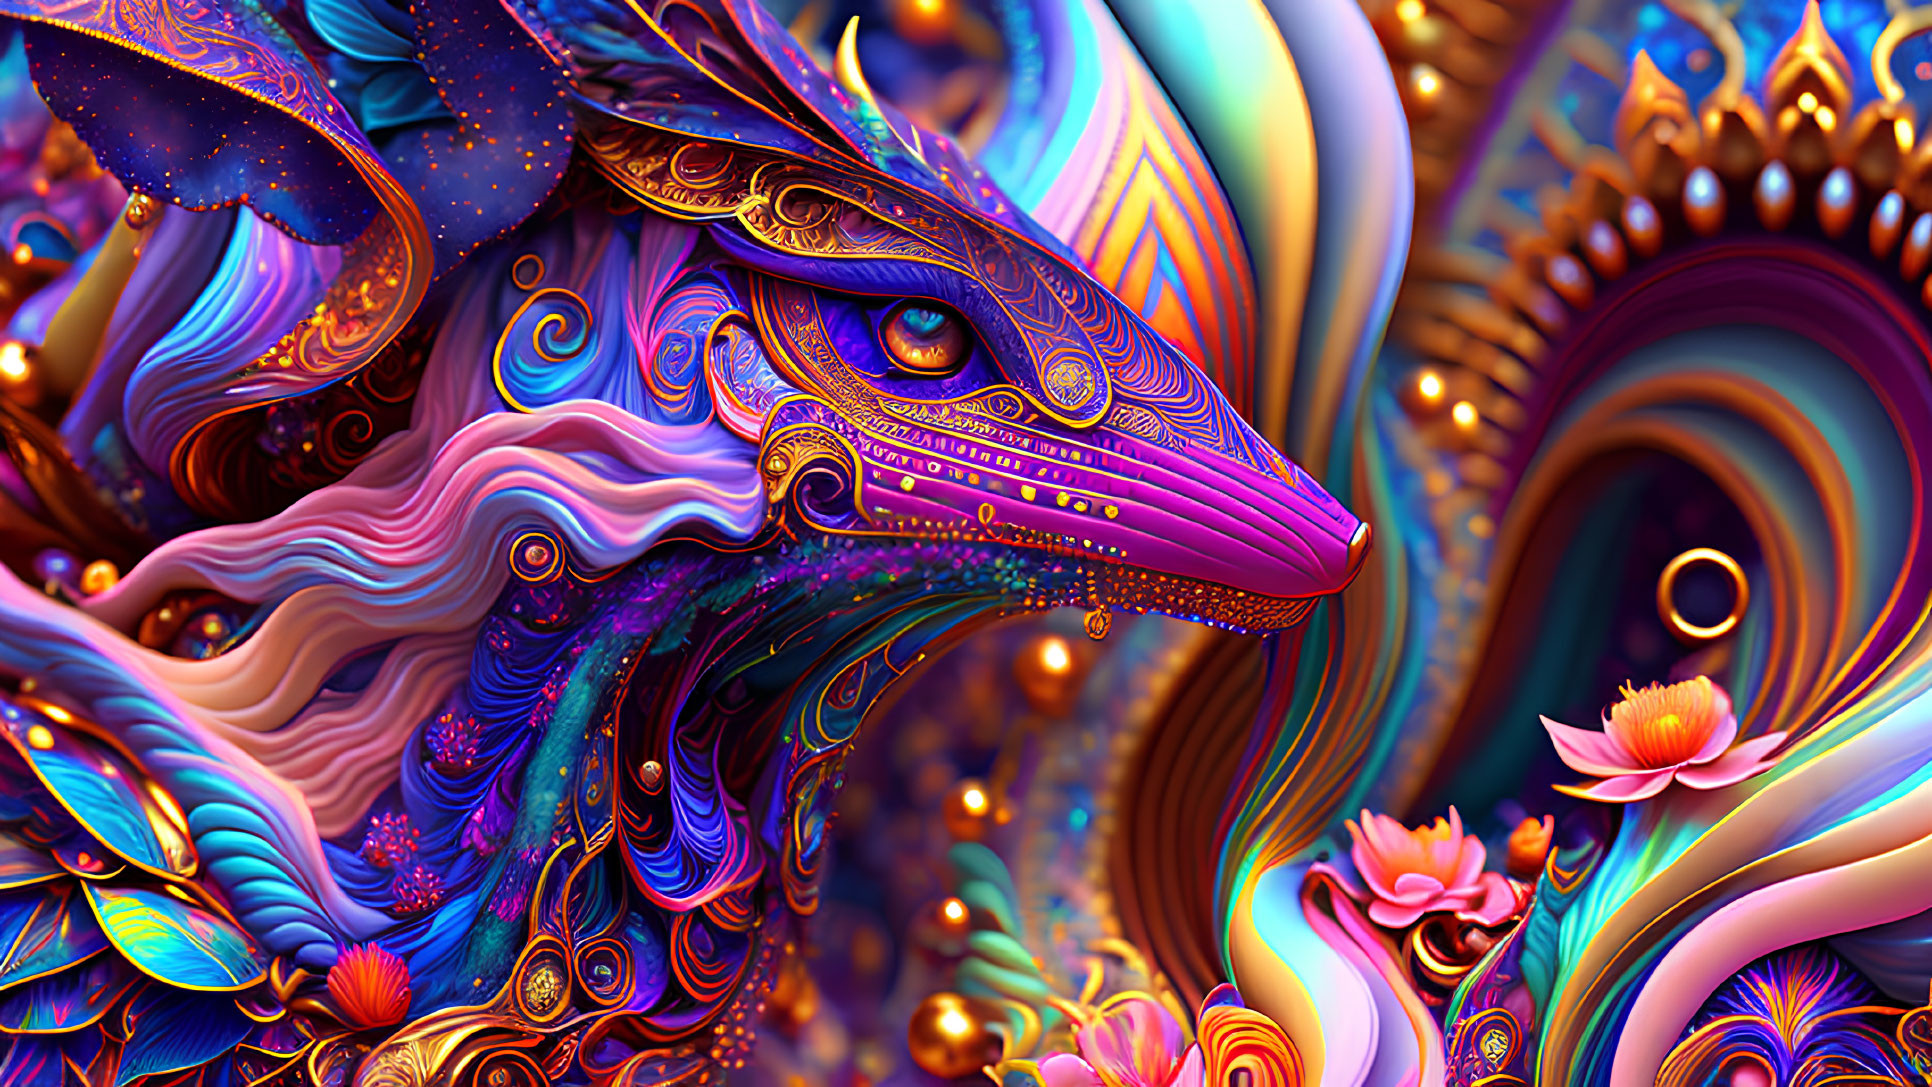 Colorful Stylized Fox Artwork with Abstract Patterns